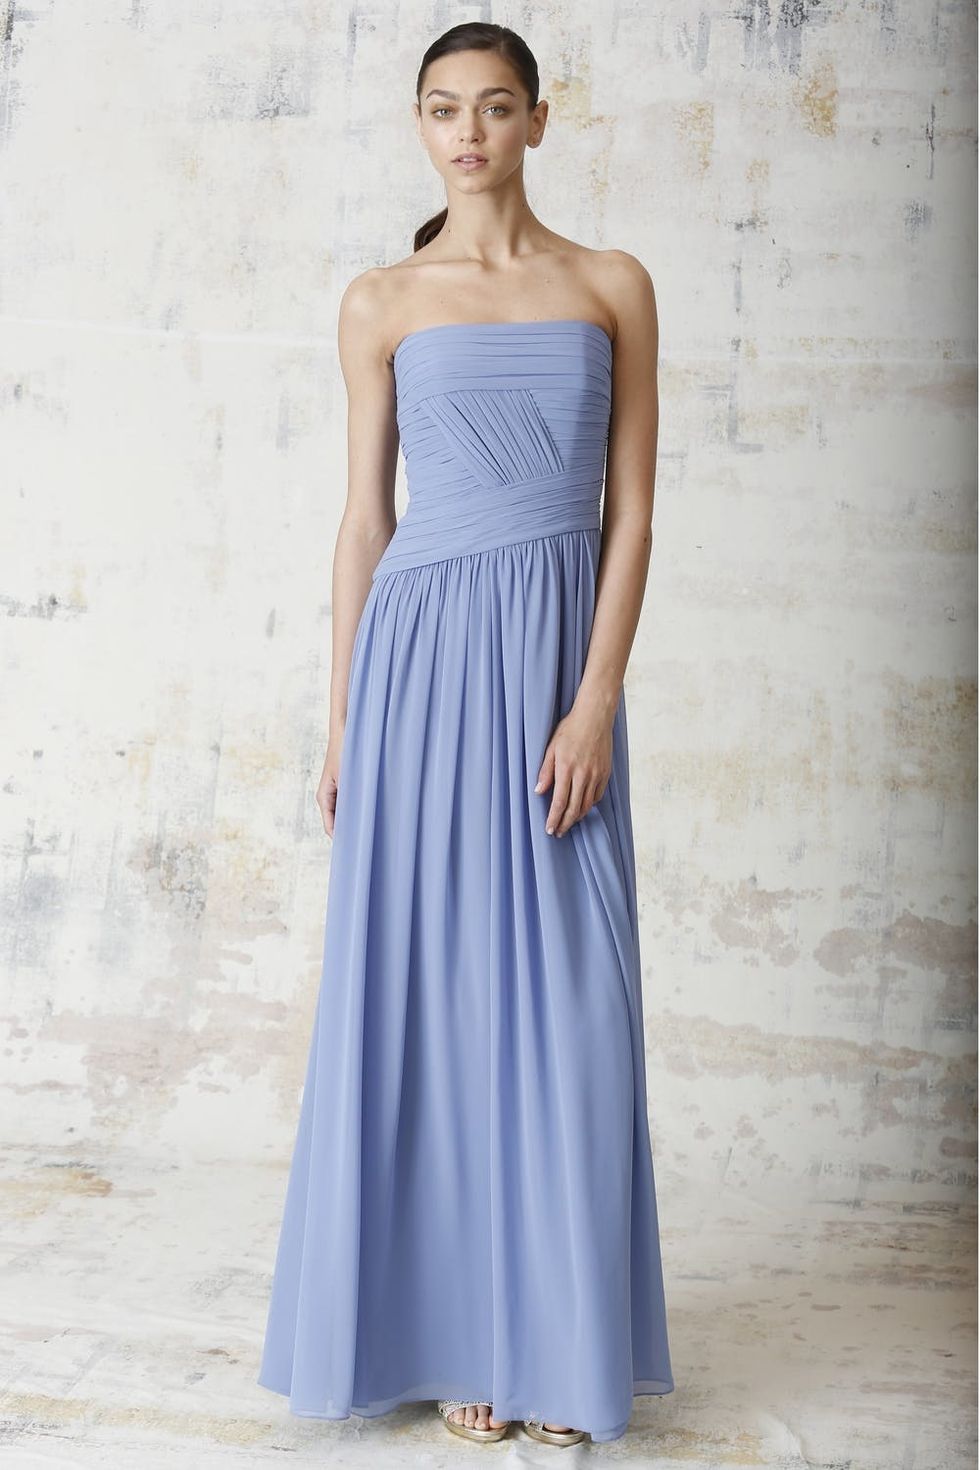 10 Gorgeous Bridesmaid’s Dress Brands You Need to Know About - Brit + Co